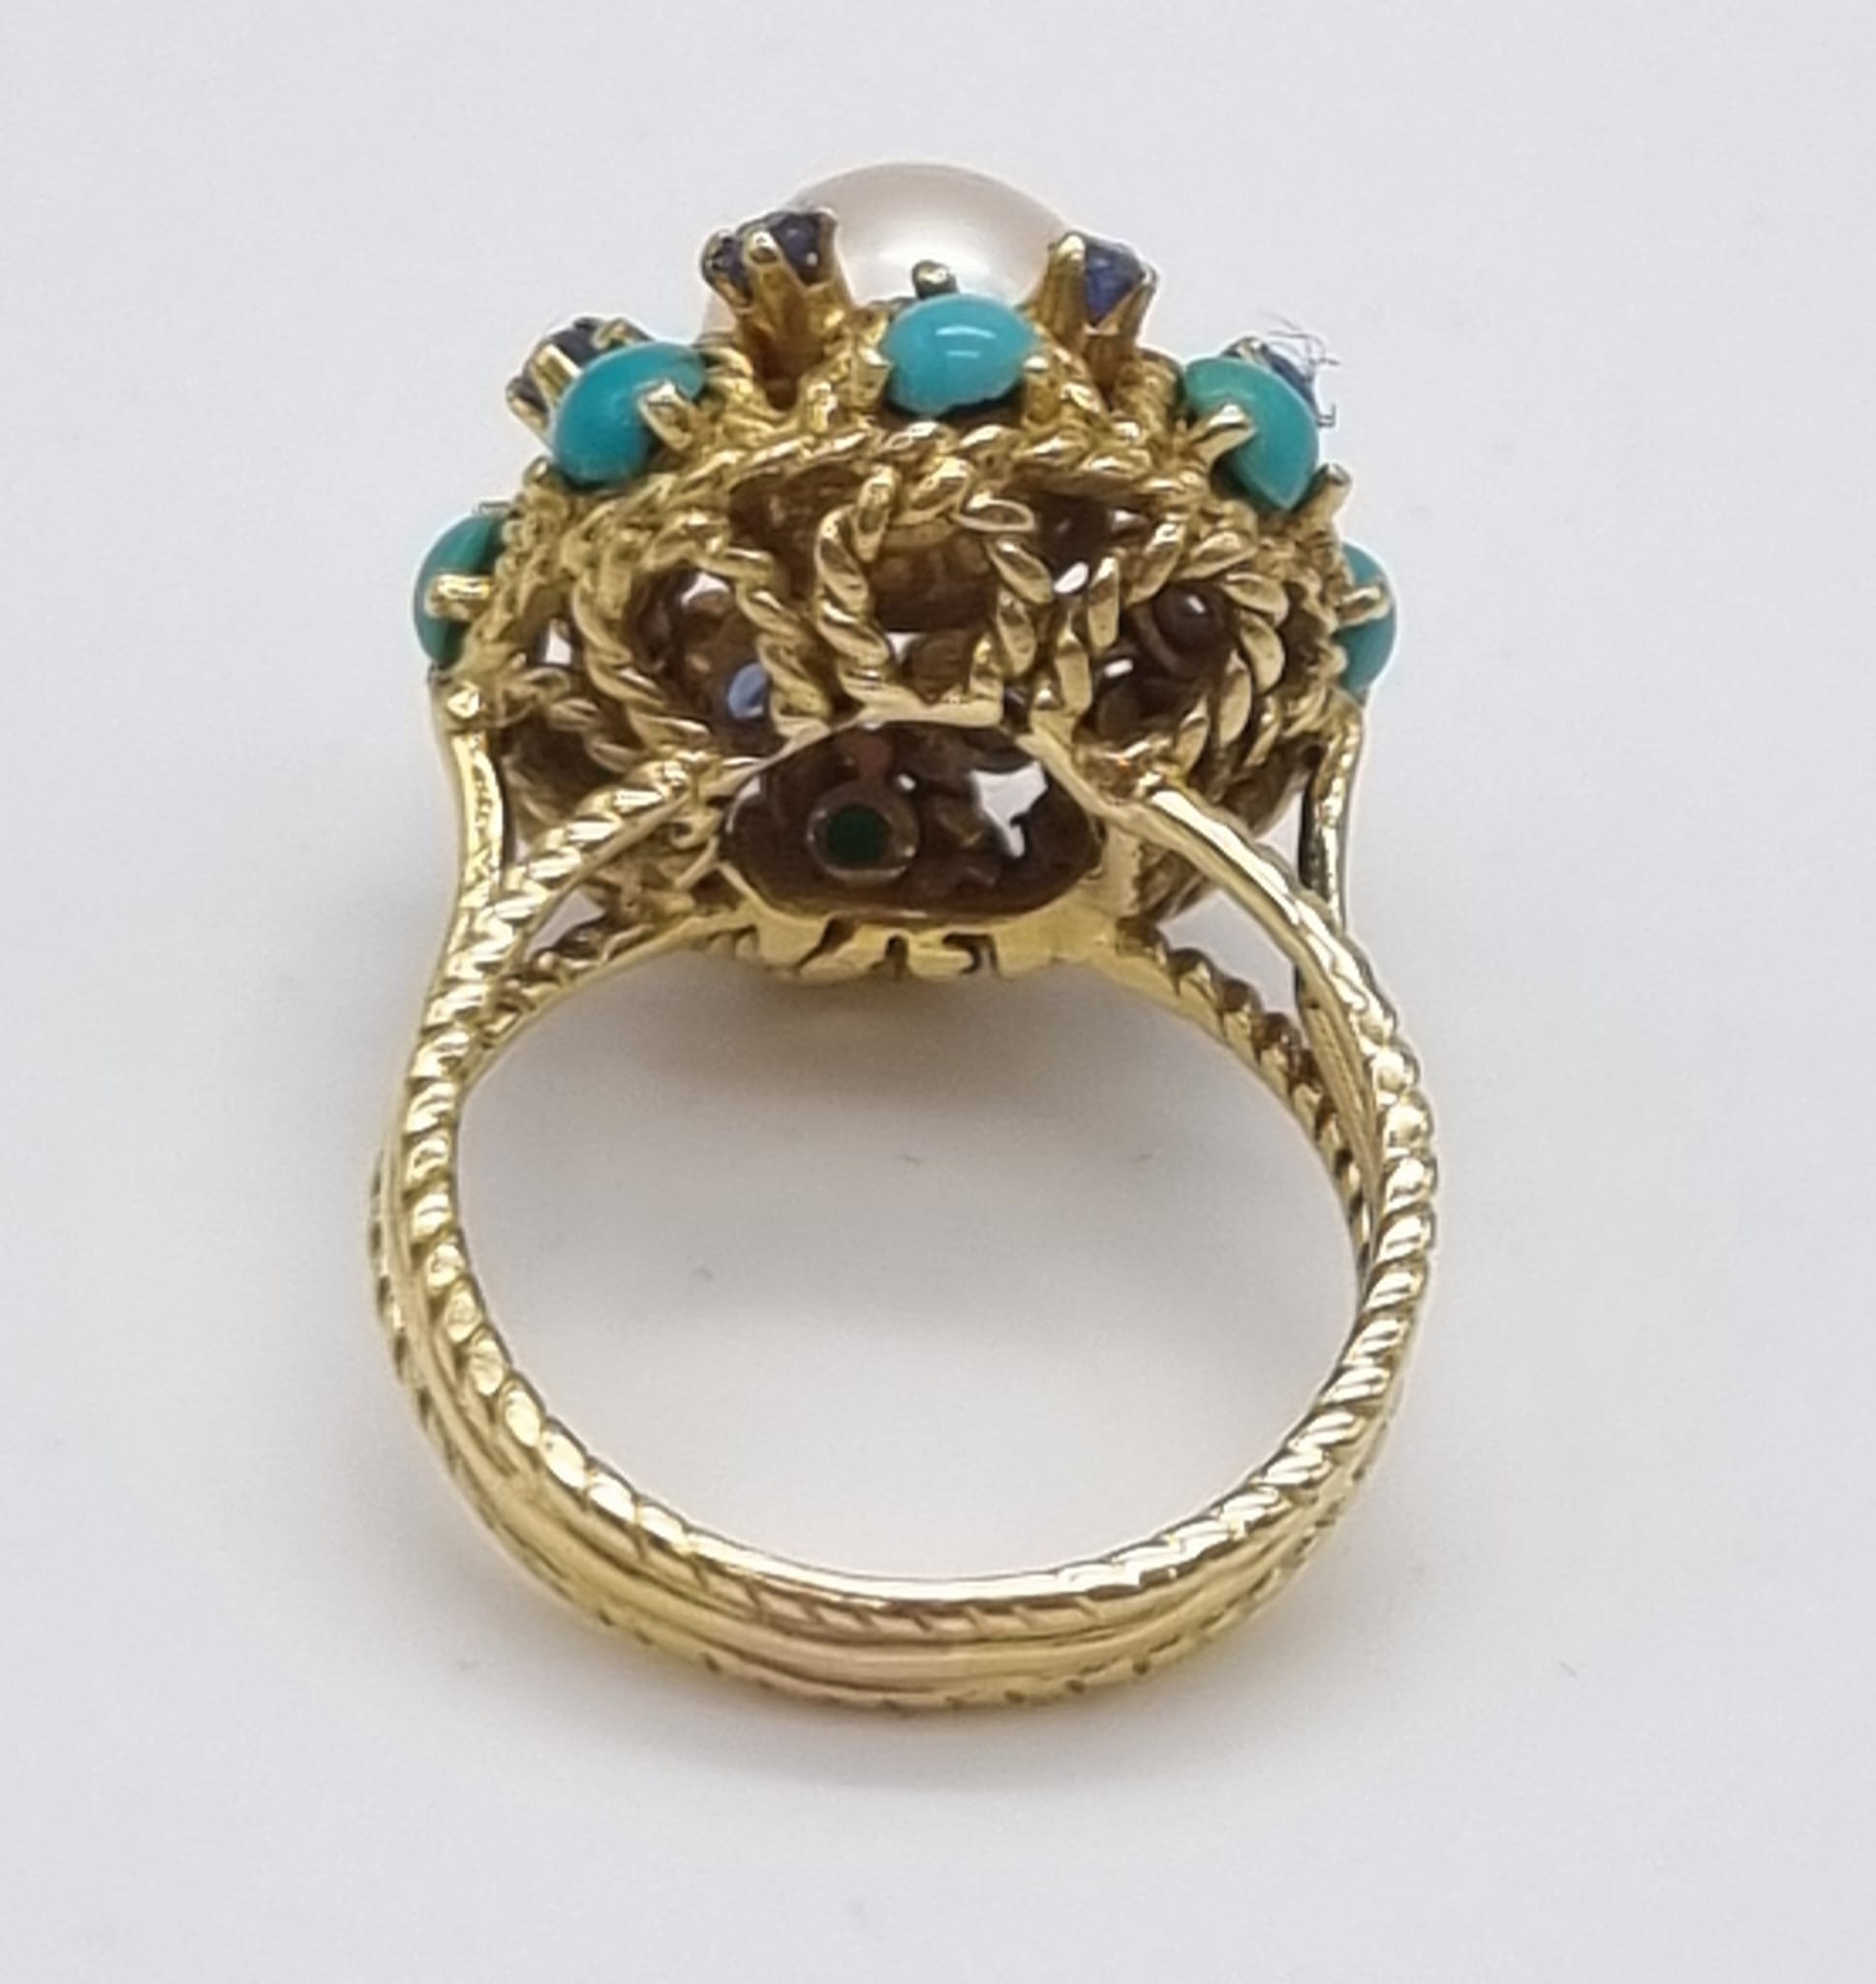 A Wonderful Vintage Possibly Antique 18K Yellow Gold, Turquoise and Pearl Ring/Brooch Set. Ring - - Image 7 of 13